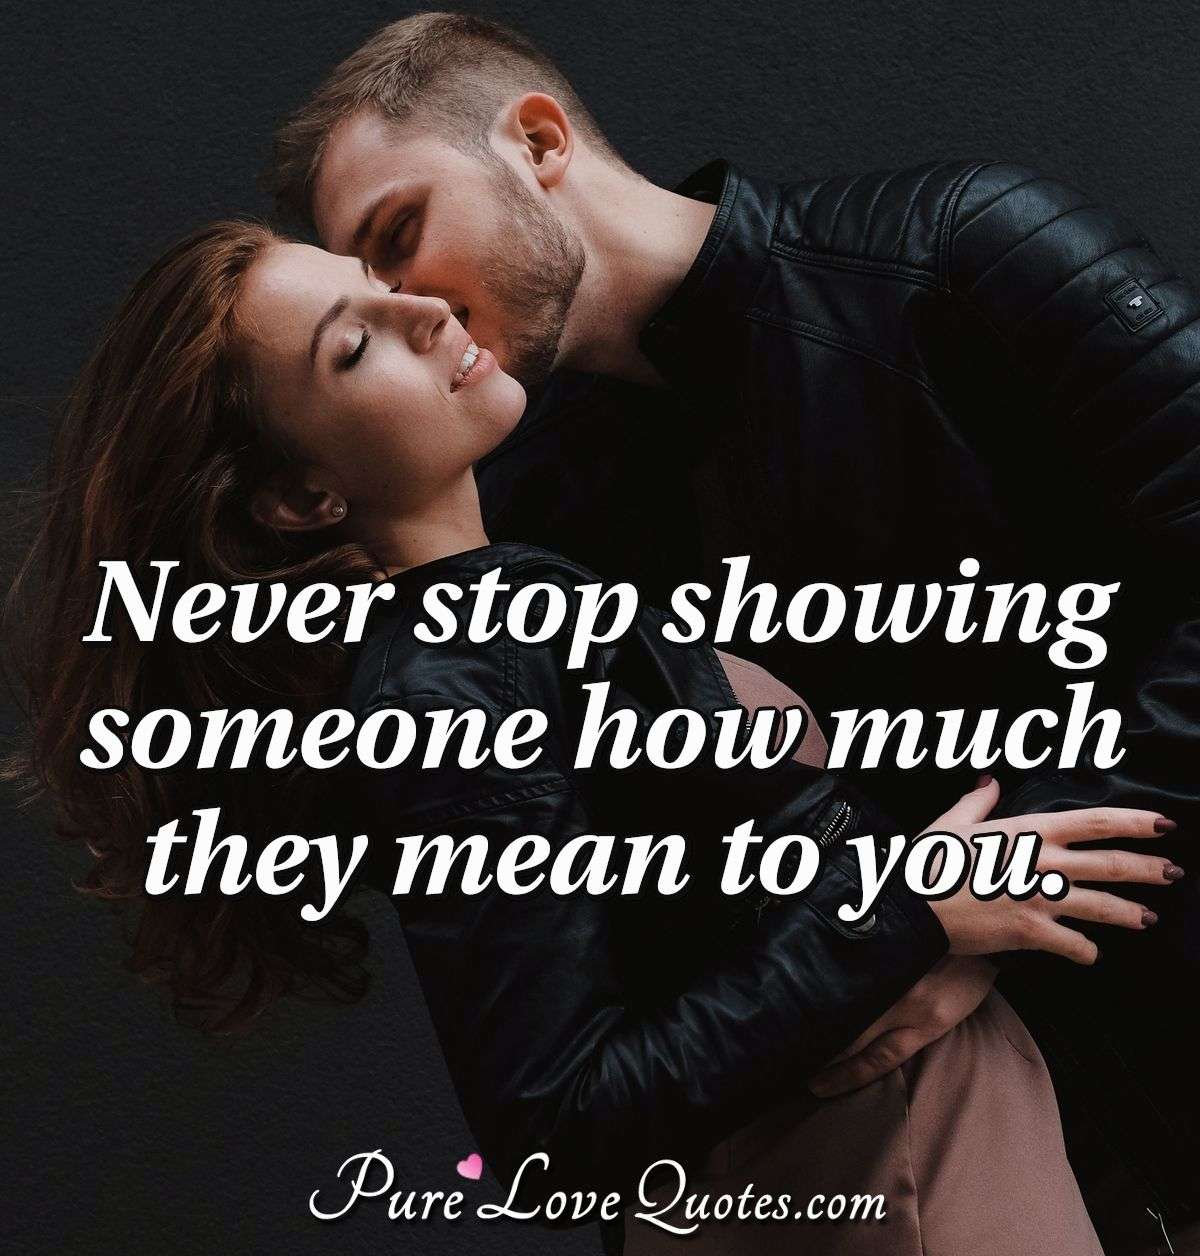 Never stop showing someone how much they mean to you. - Anonymous